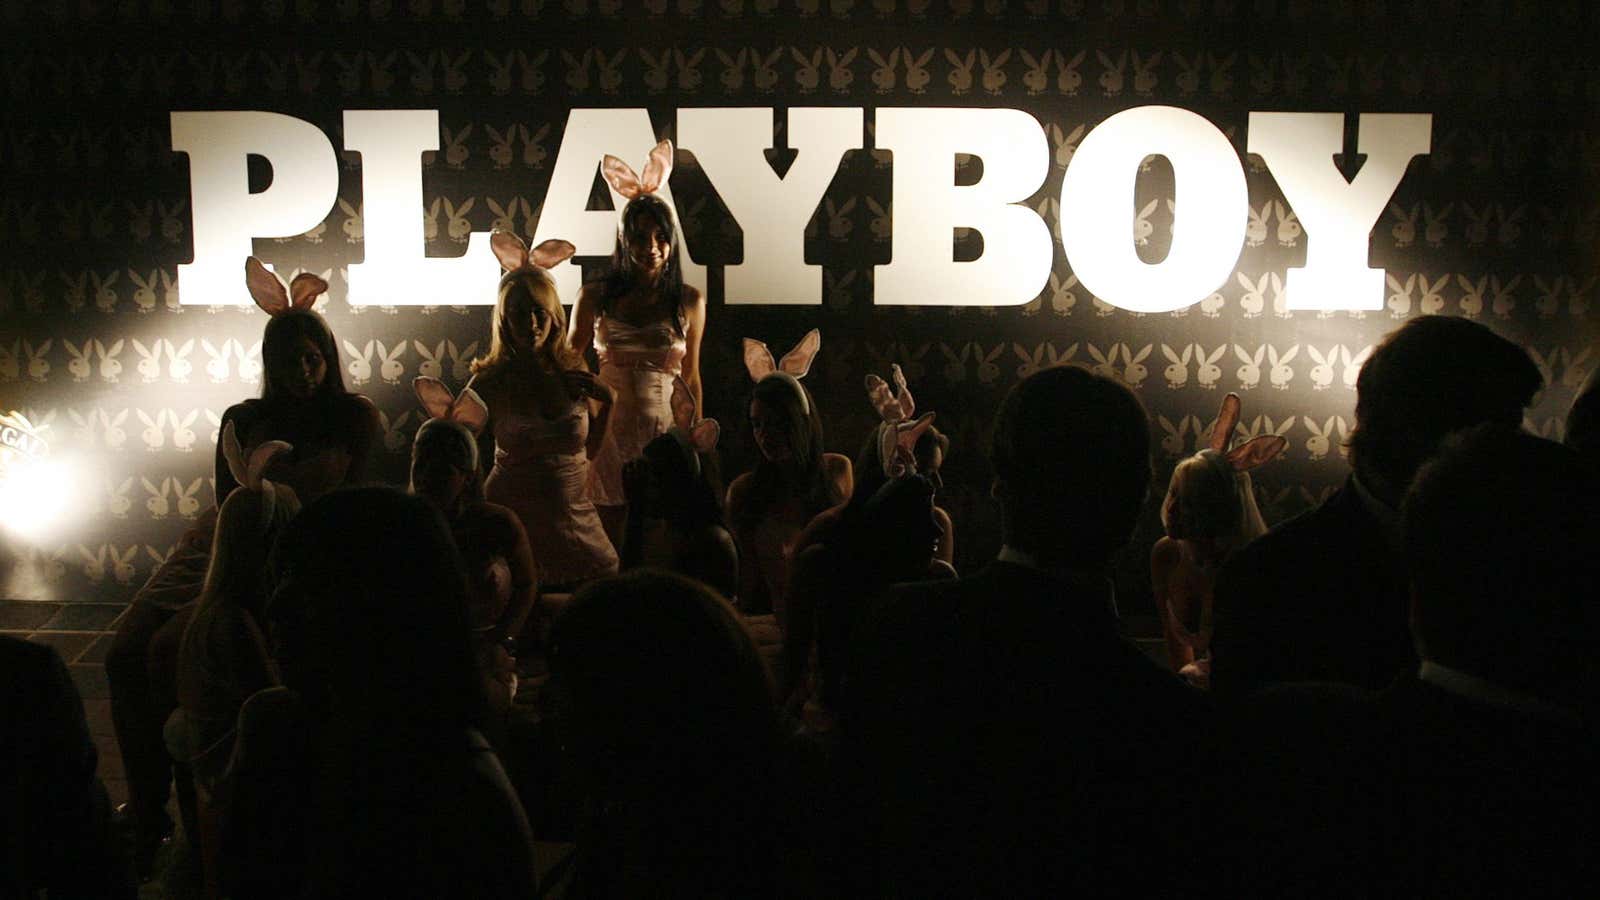 Playboy is public once again.